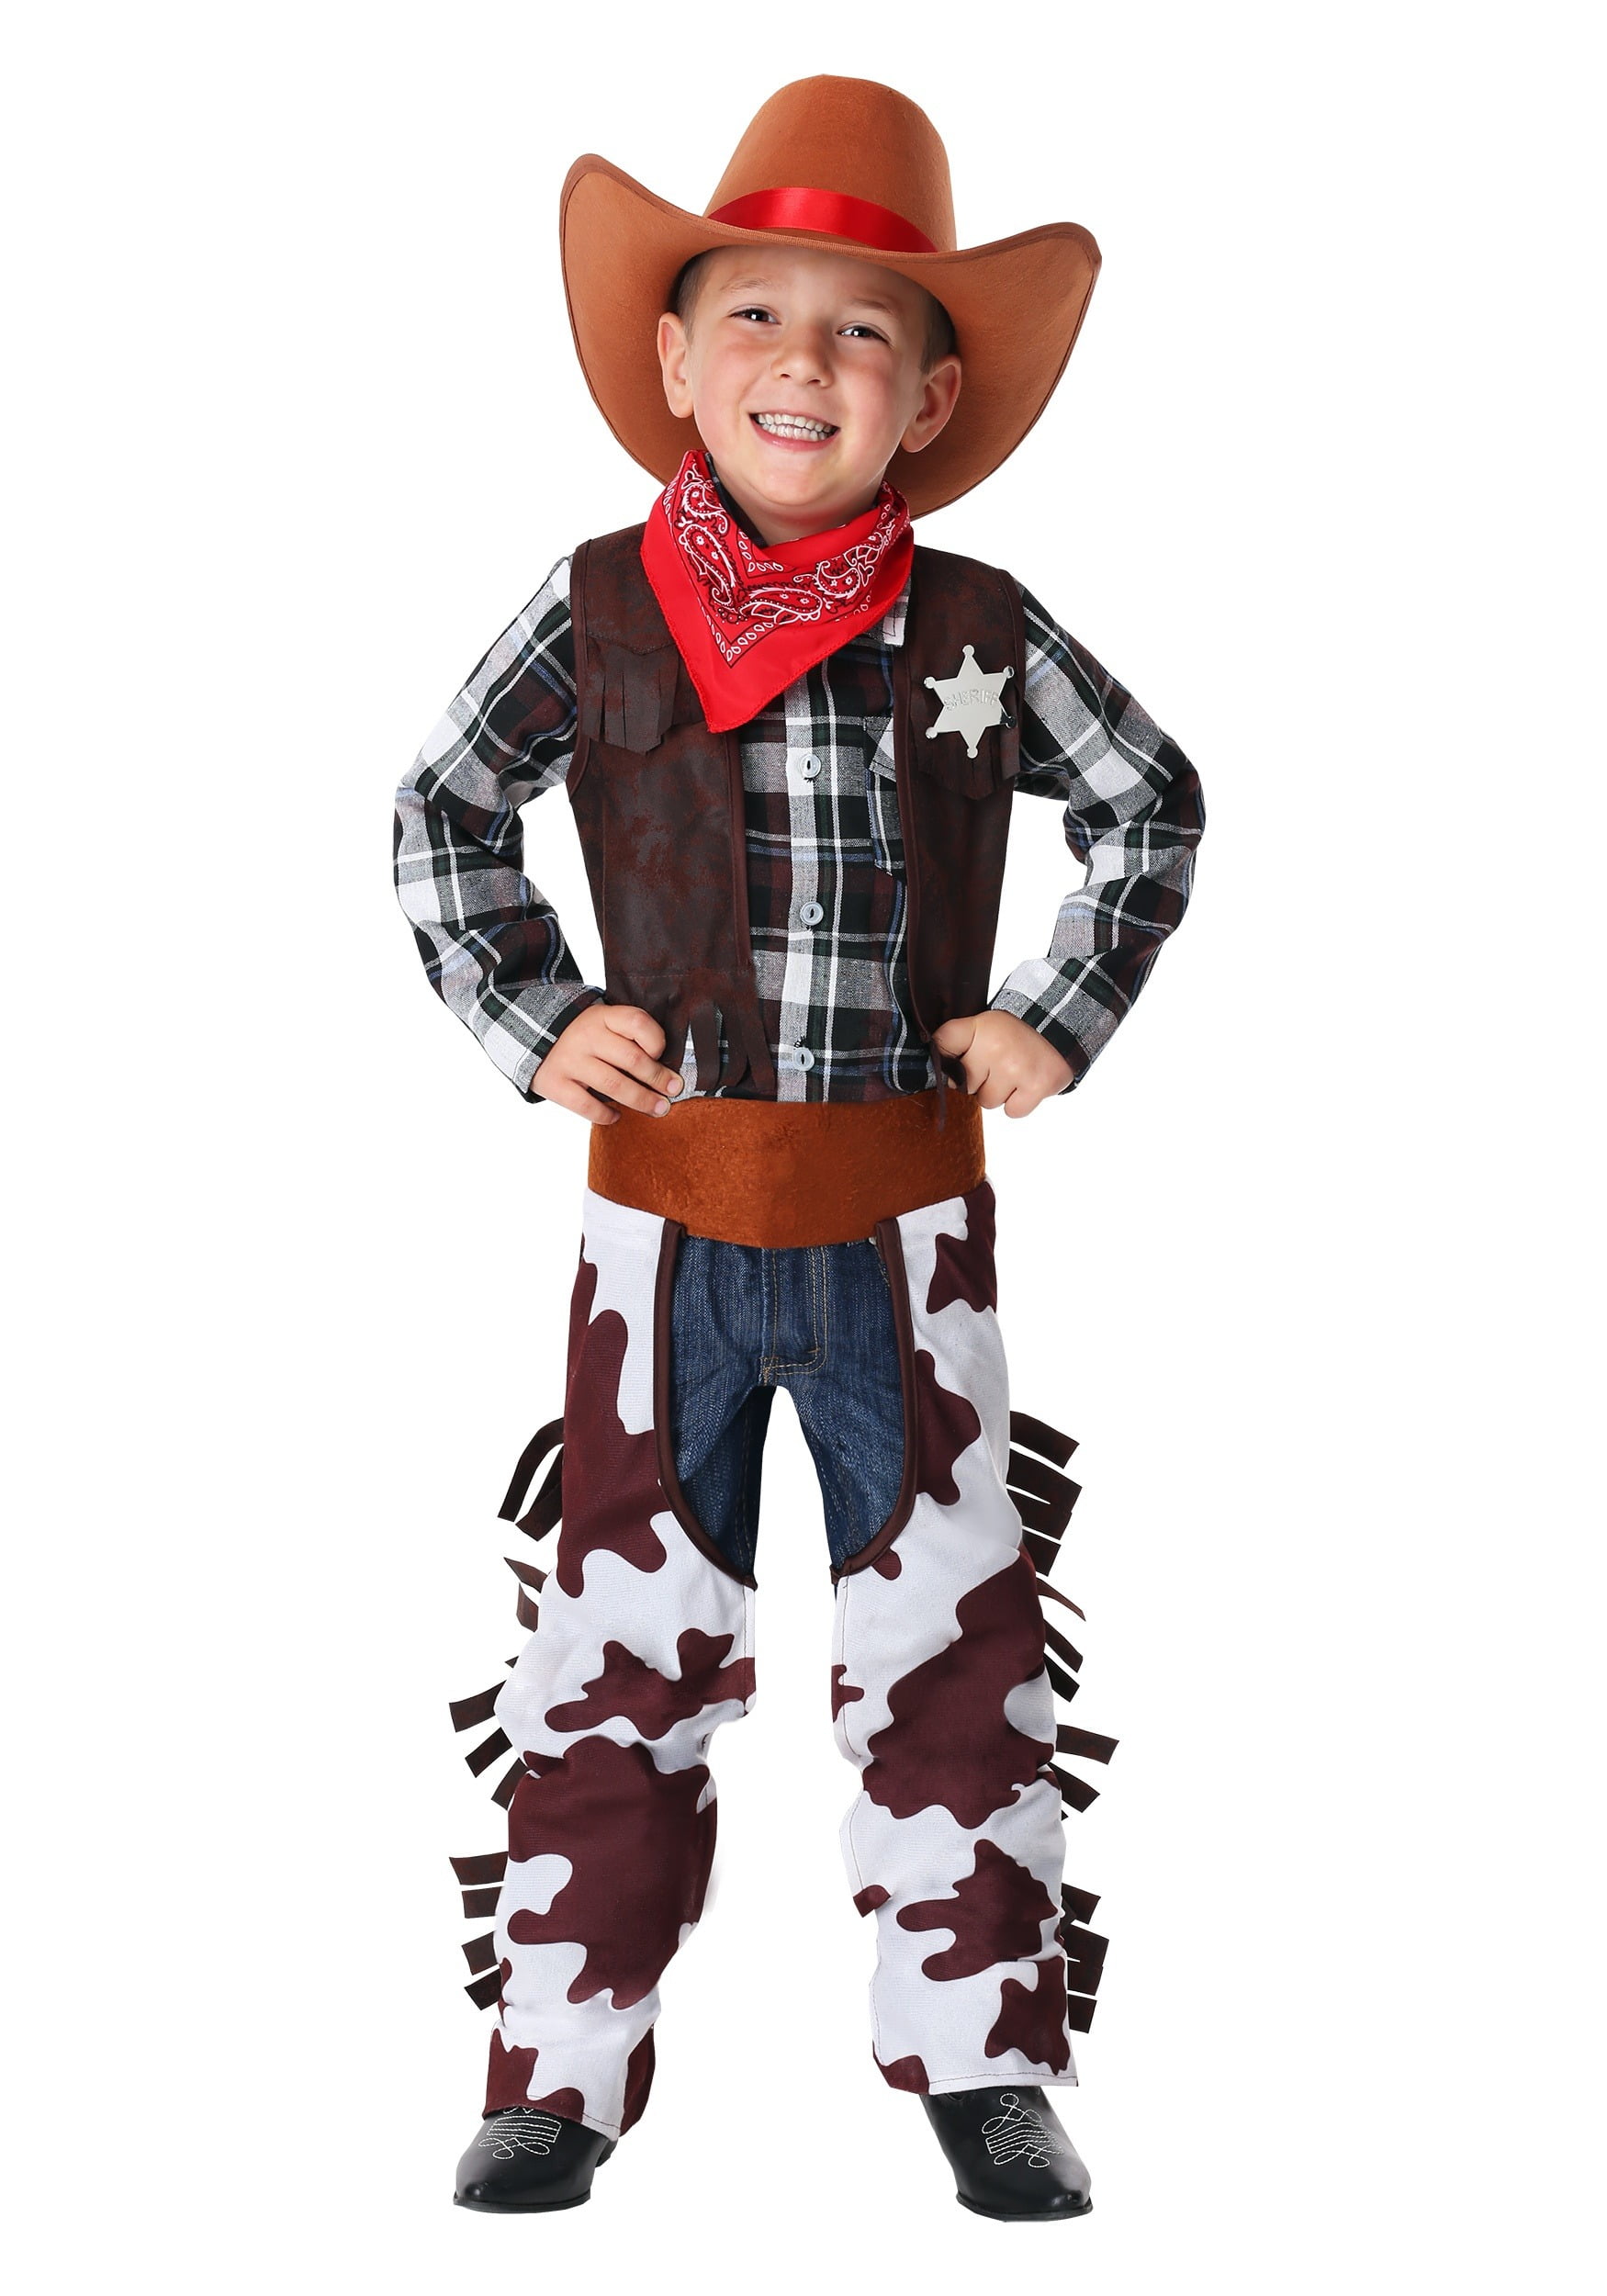 Cowboy Cowgirl Childs Fancy Dress Up Costume Outfit Western Wild Outfit Hat Kids 